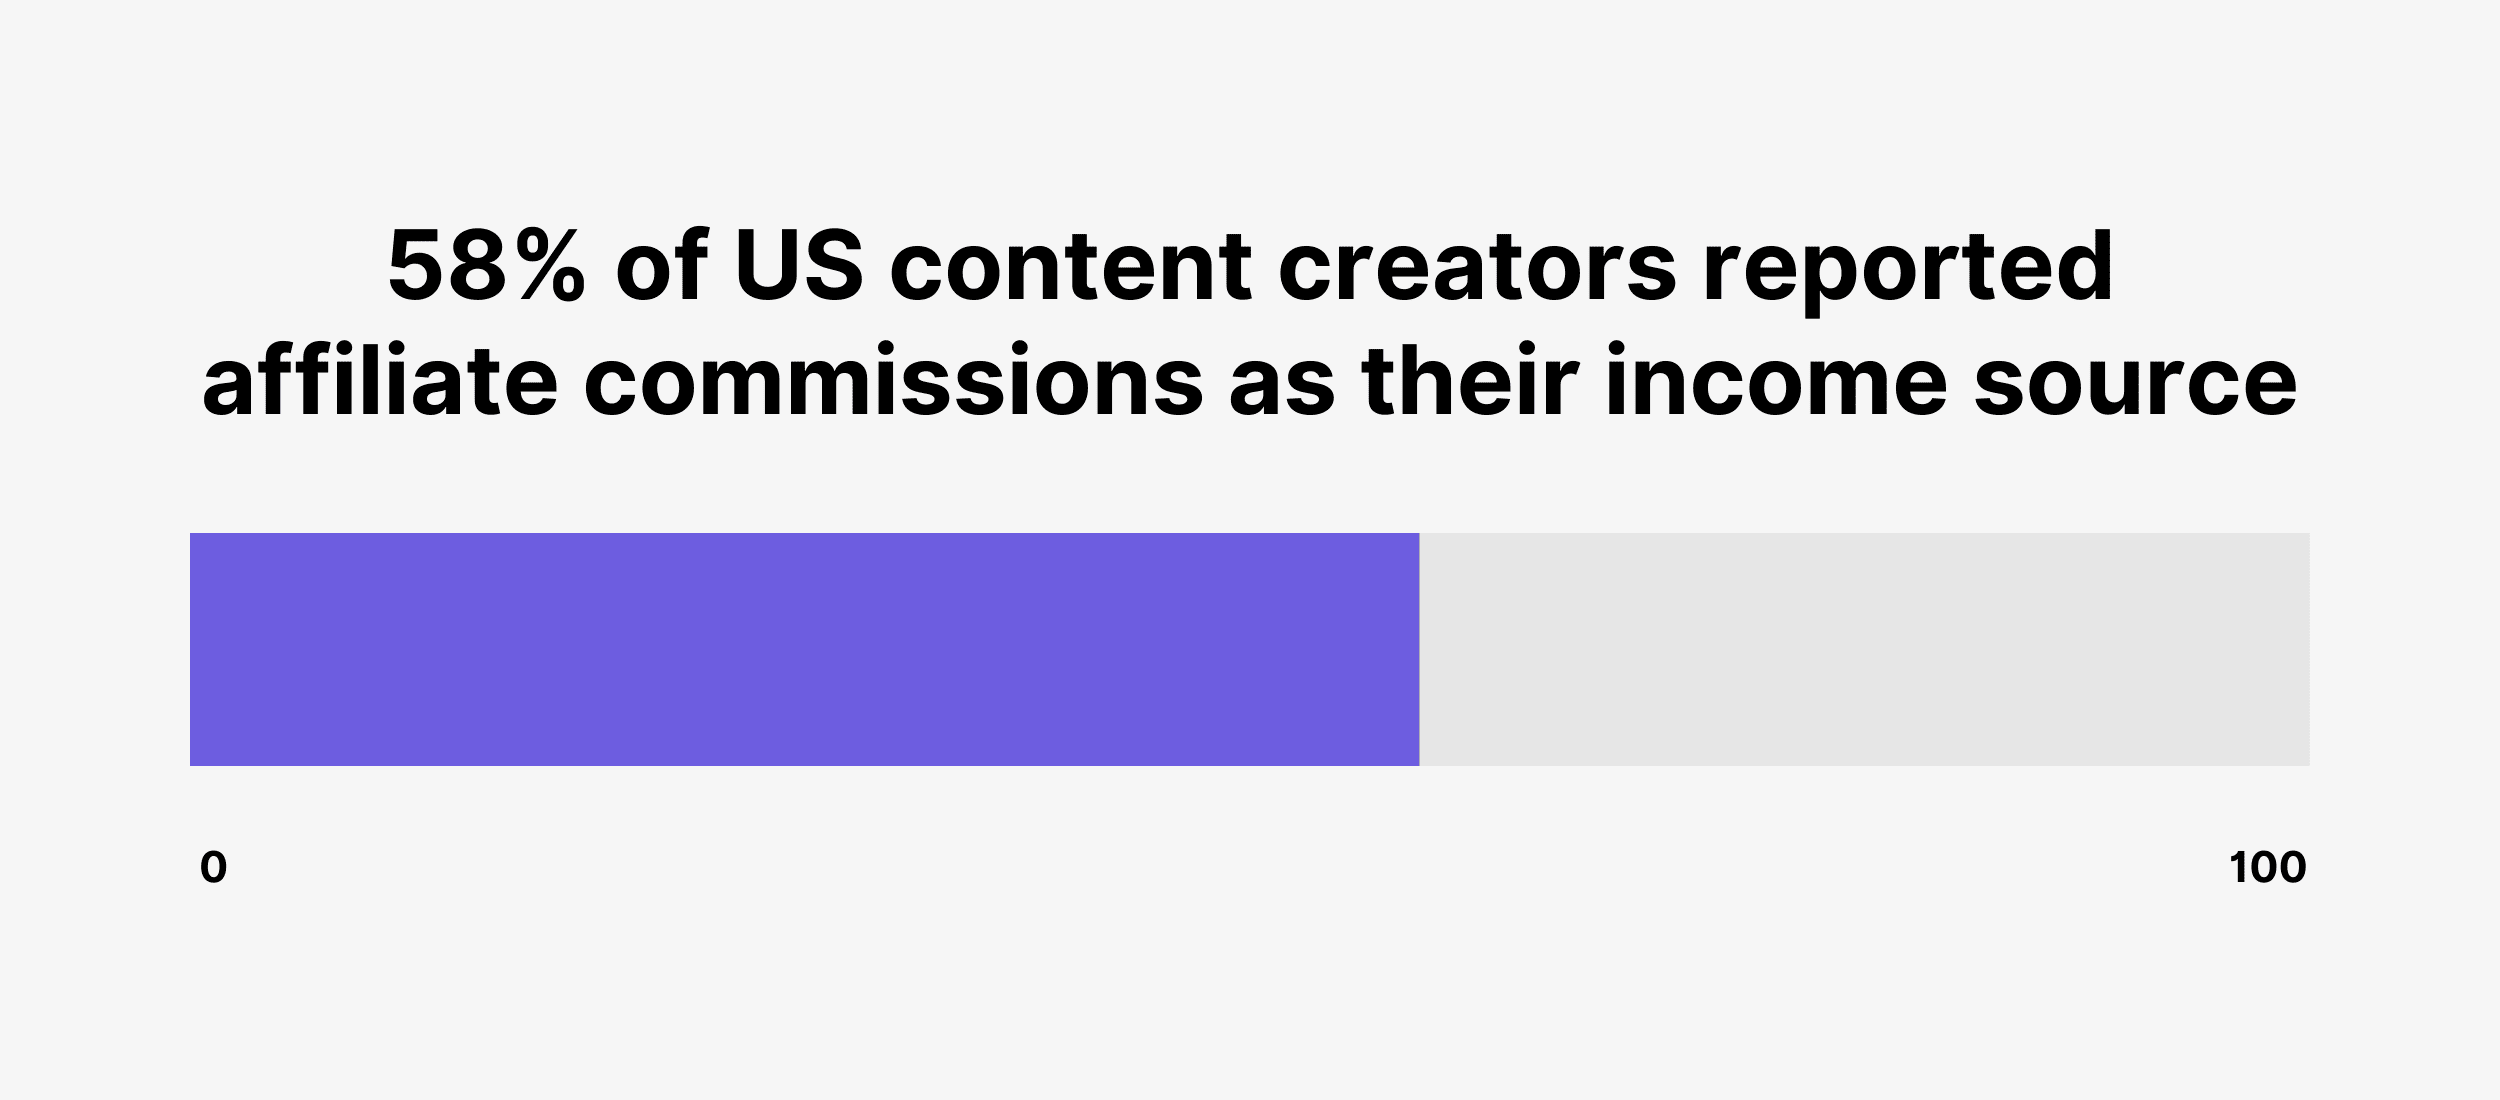 58% of US content creators reported affiliate commissions as their income source